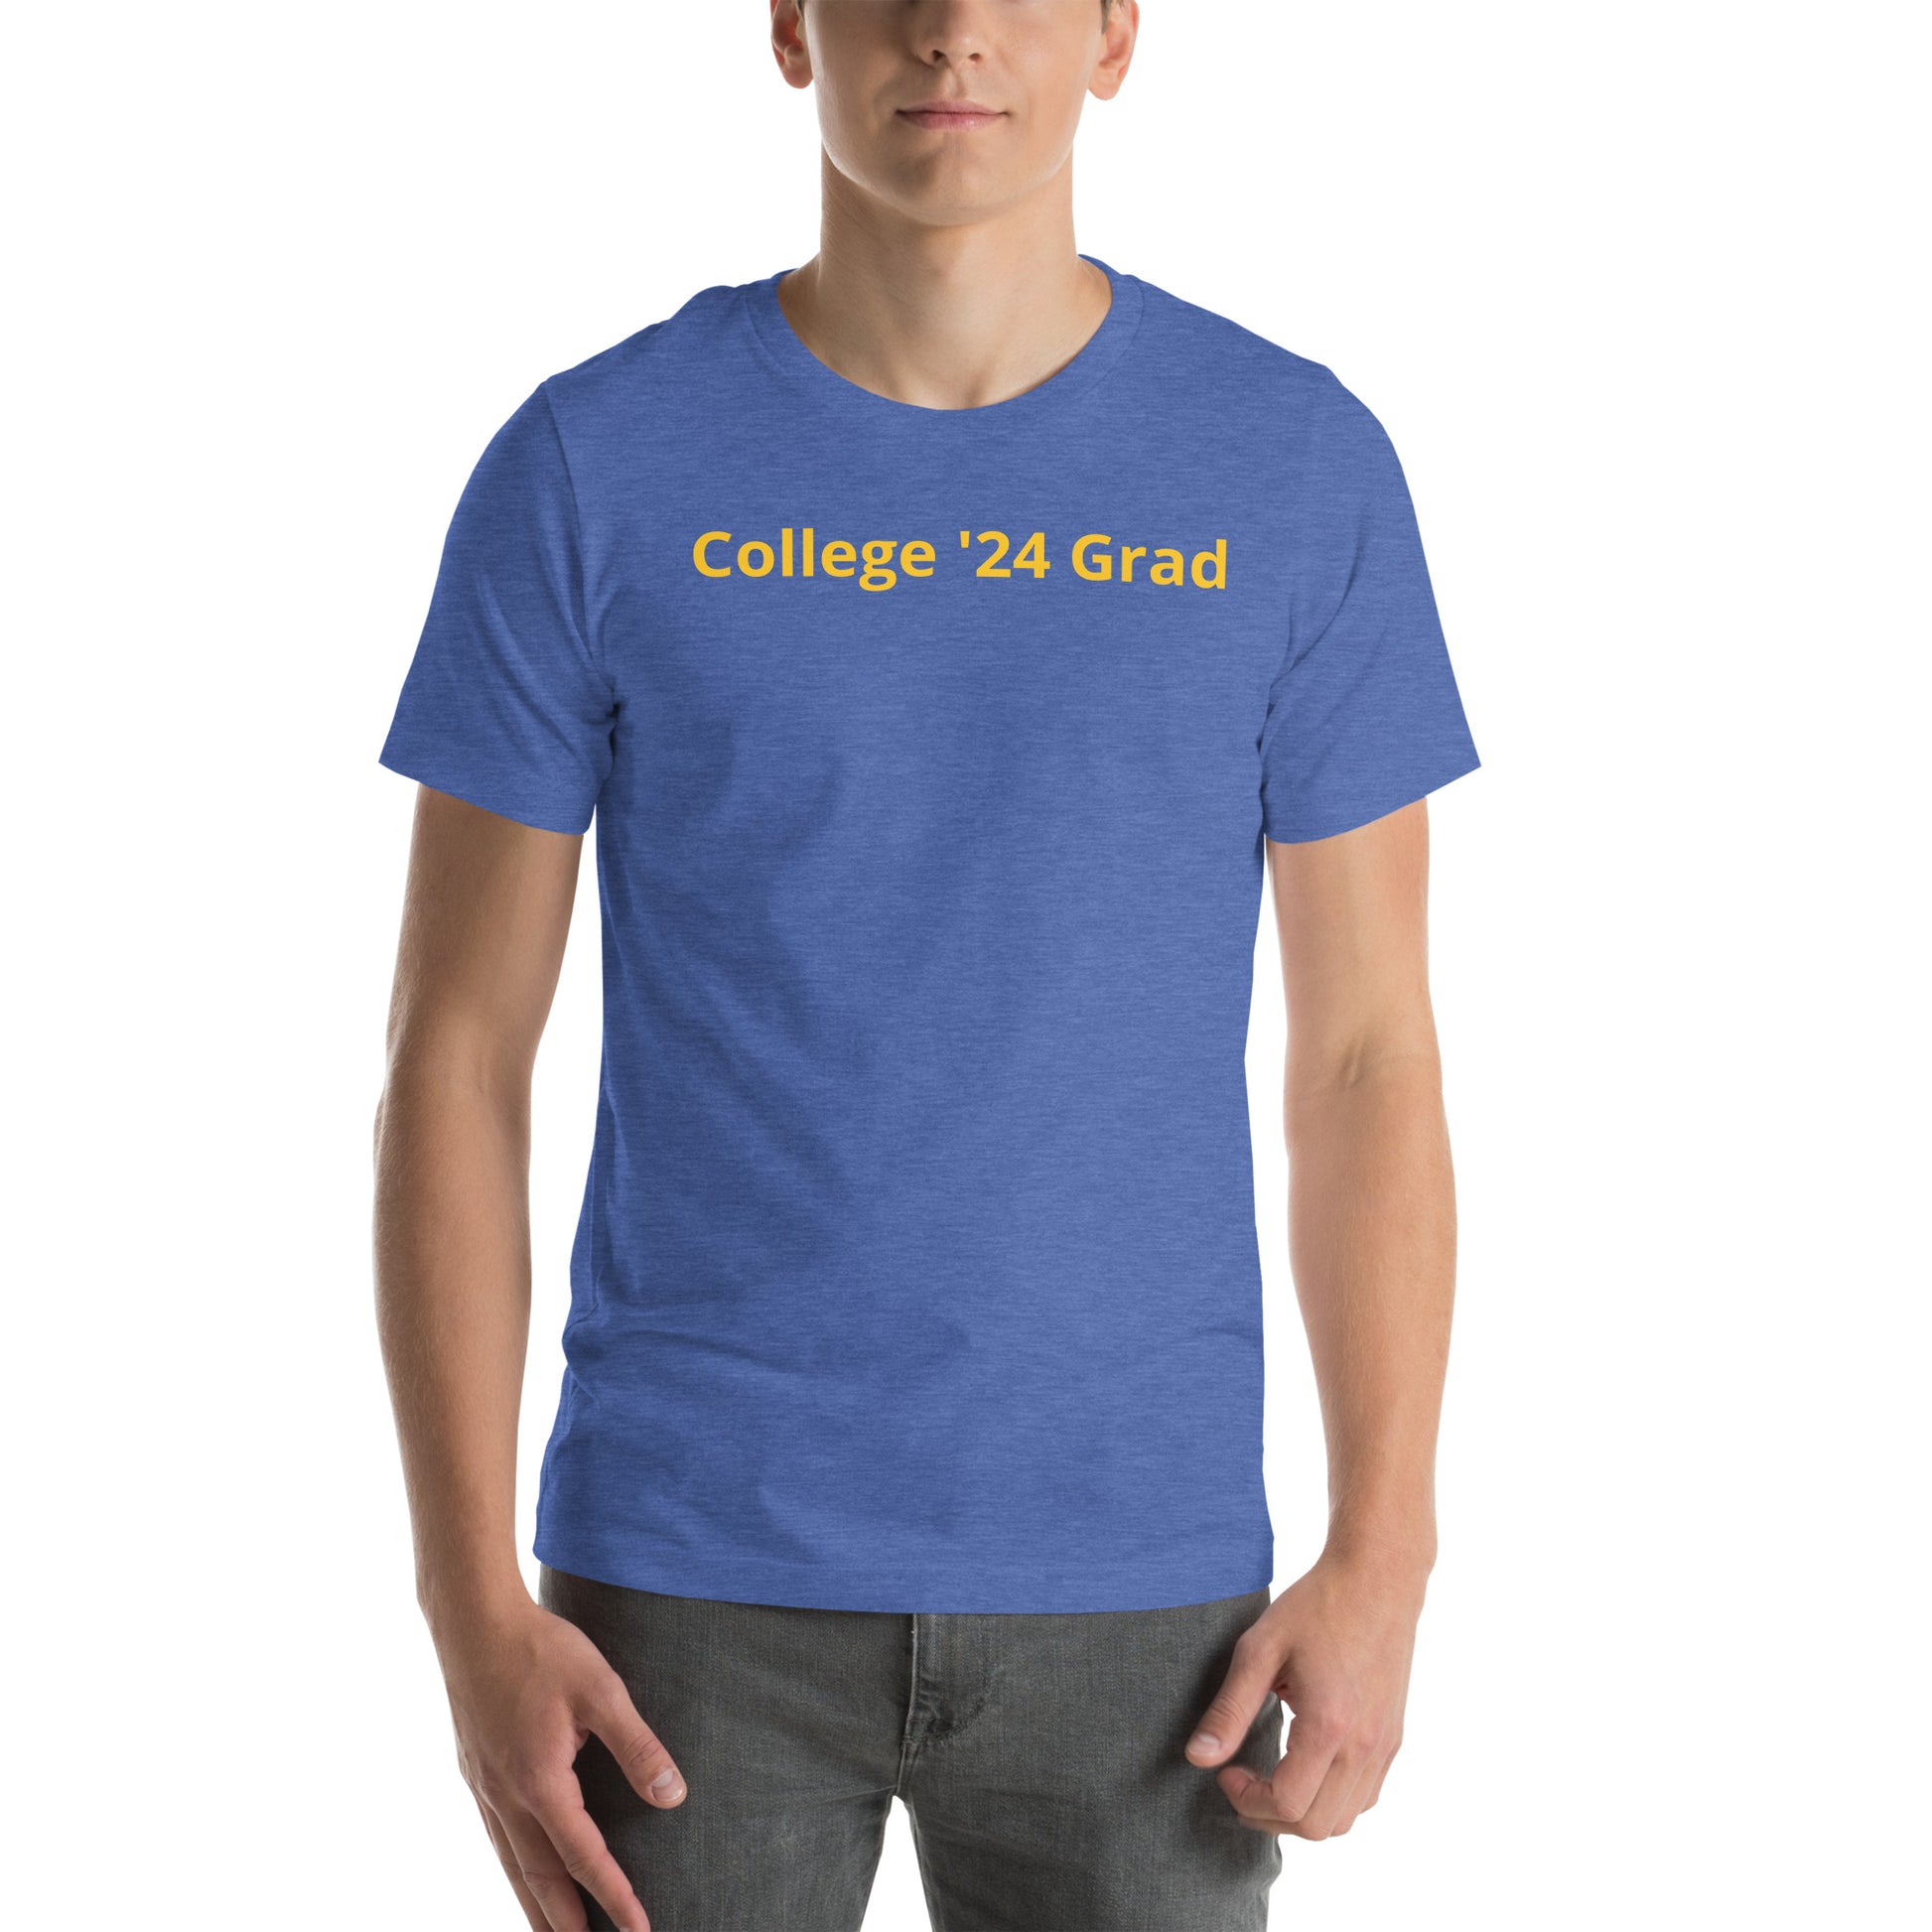 Royal blue color short sleeve tee shirt that says "College '24 Grad" on the front and "Thank you, Mom & Dad" on the back in yellow-gold font